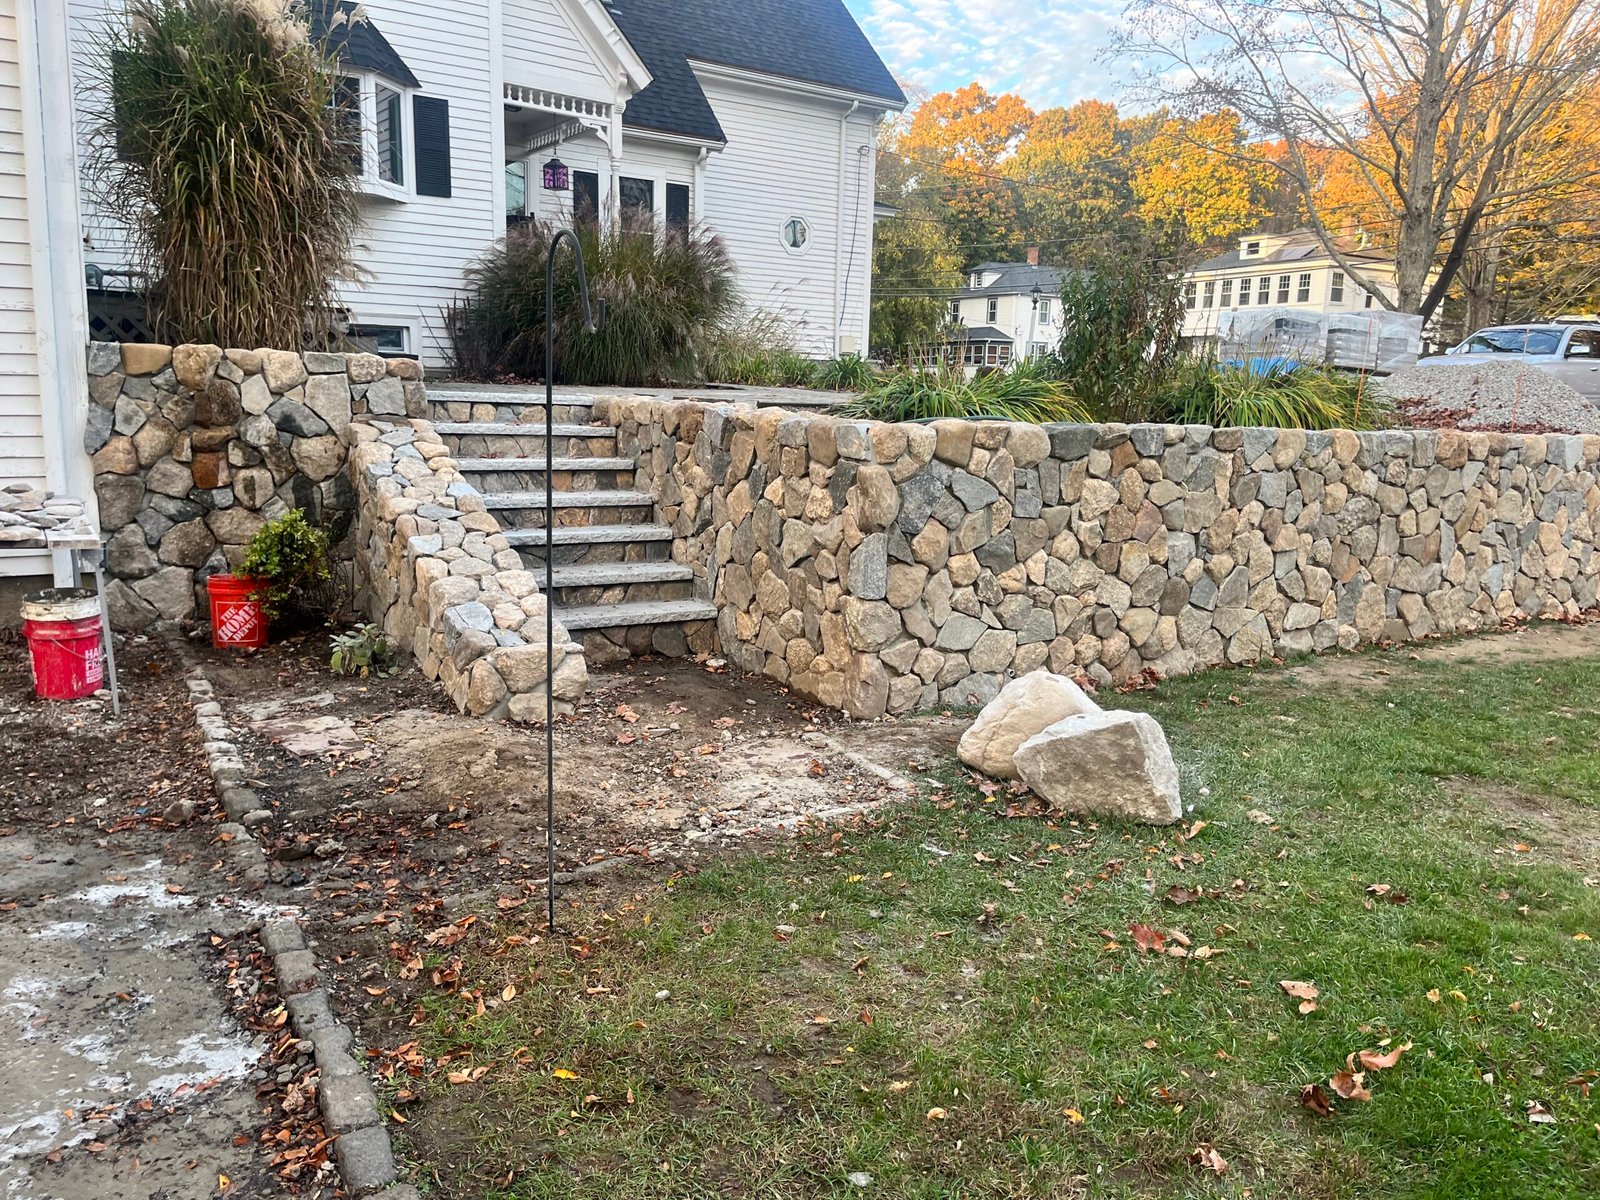 Retainer wall using stone veneer materials in the front yard. There is grass in the front as well as a house in the back